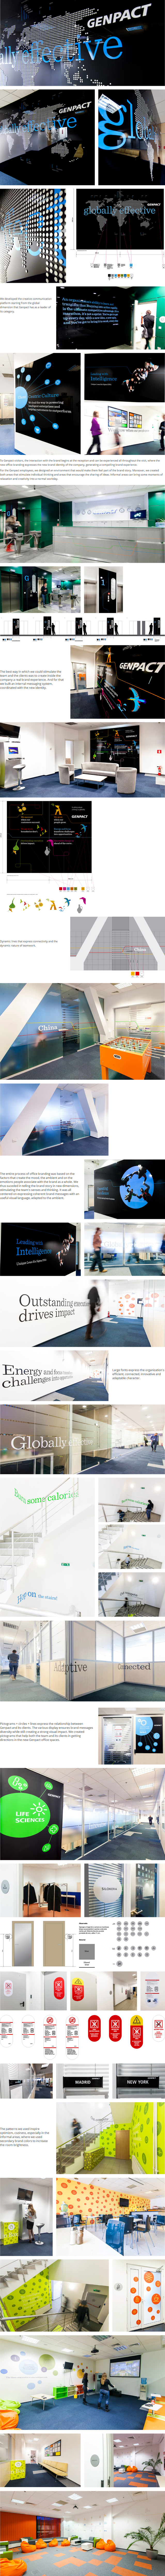 environment Signage workspace building company office walls wayfinding Production Global corporate image